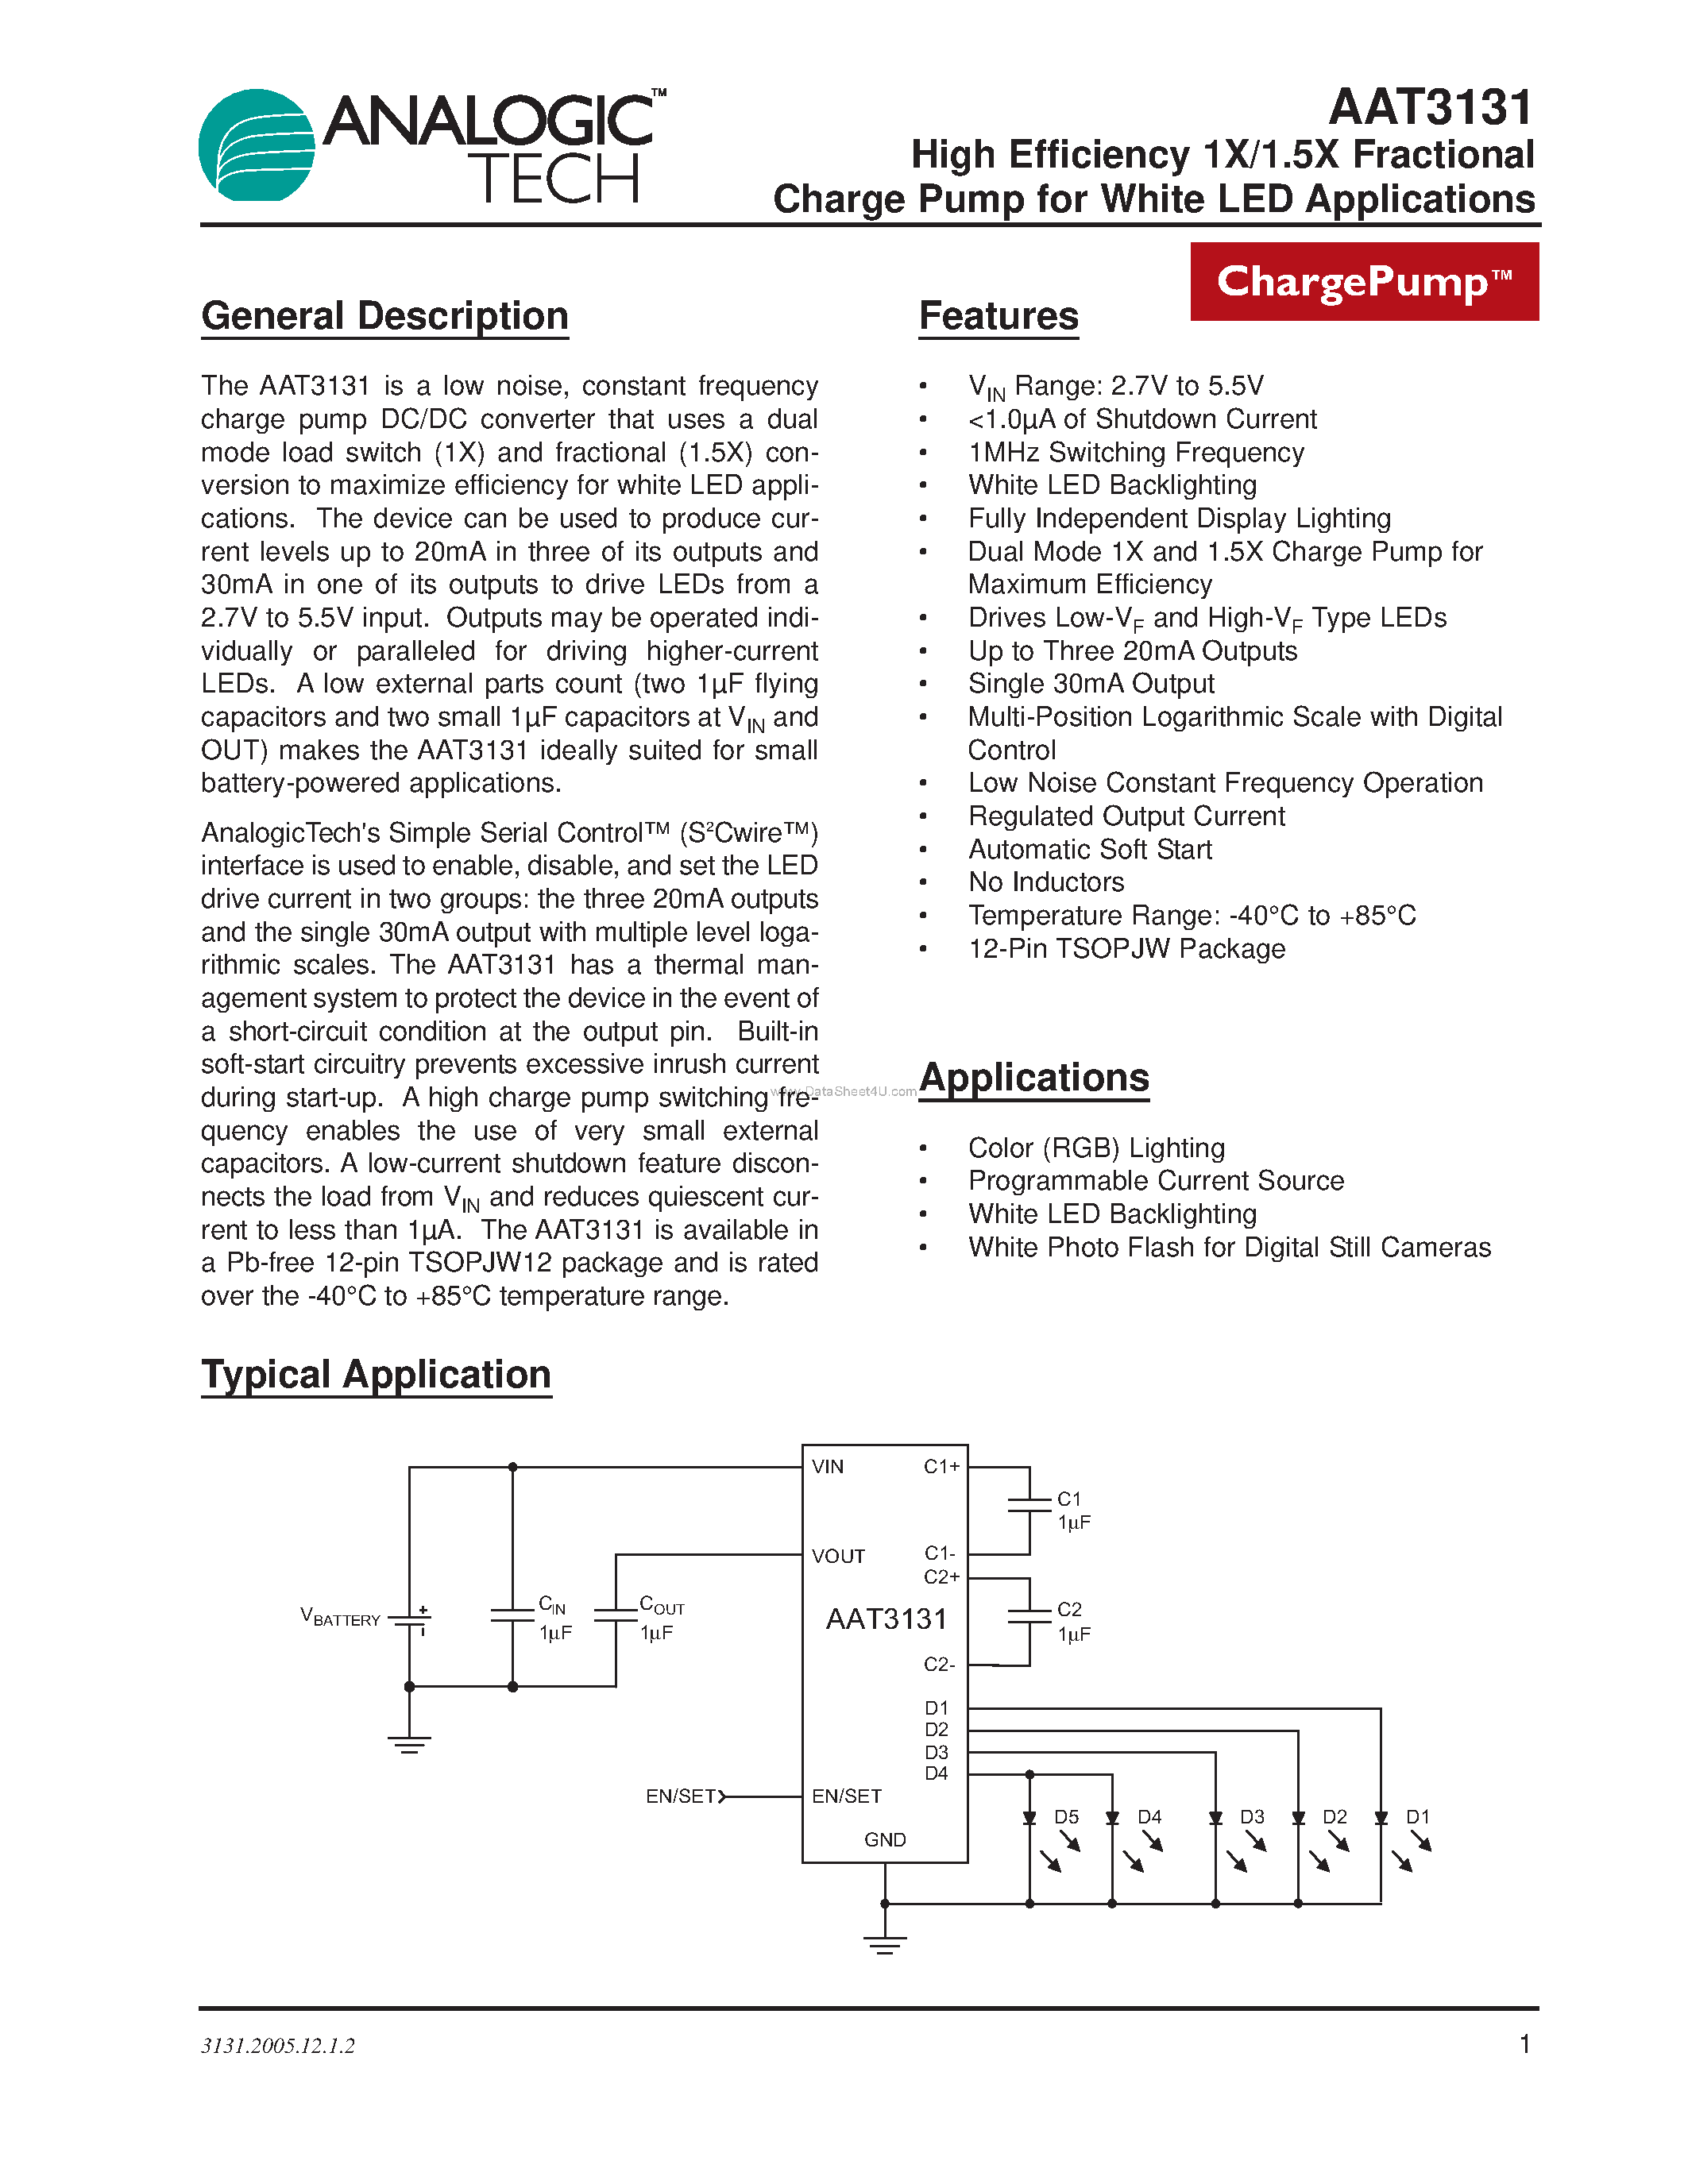 Datasheet AAT3131 - High Efficiency 1X/1.5X Fractional Charge Pump page 1